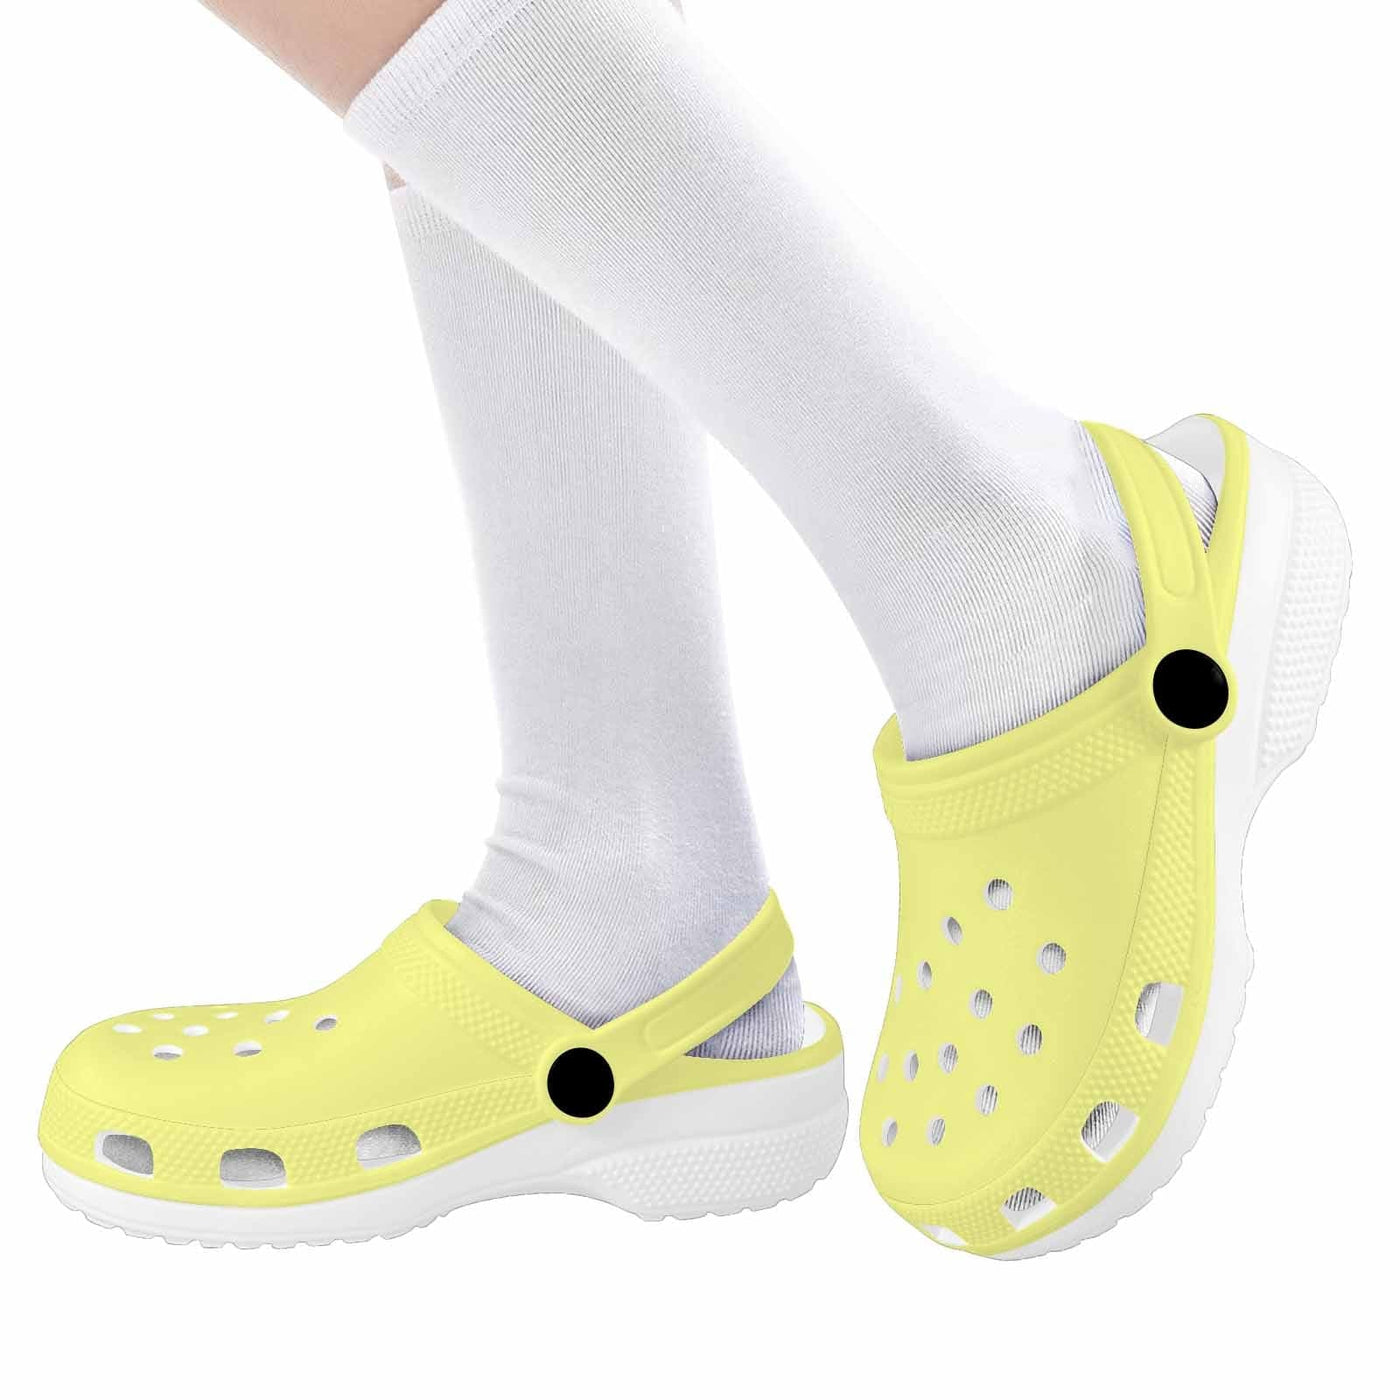 Pastel Yellow Kids Clogs - Unisex | Clogs | Youth